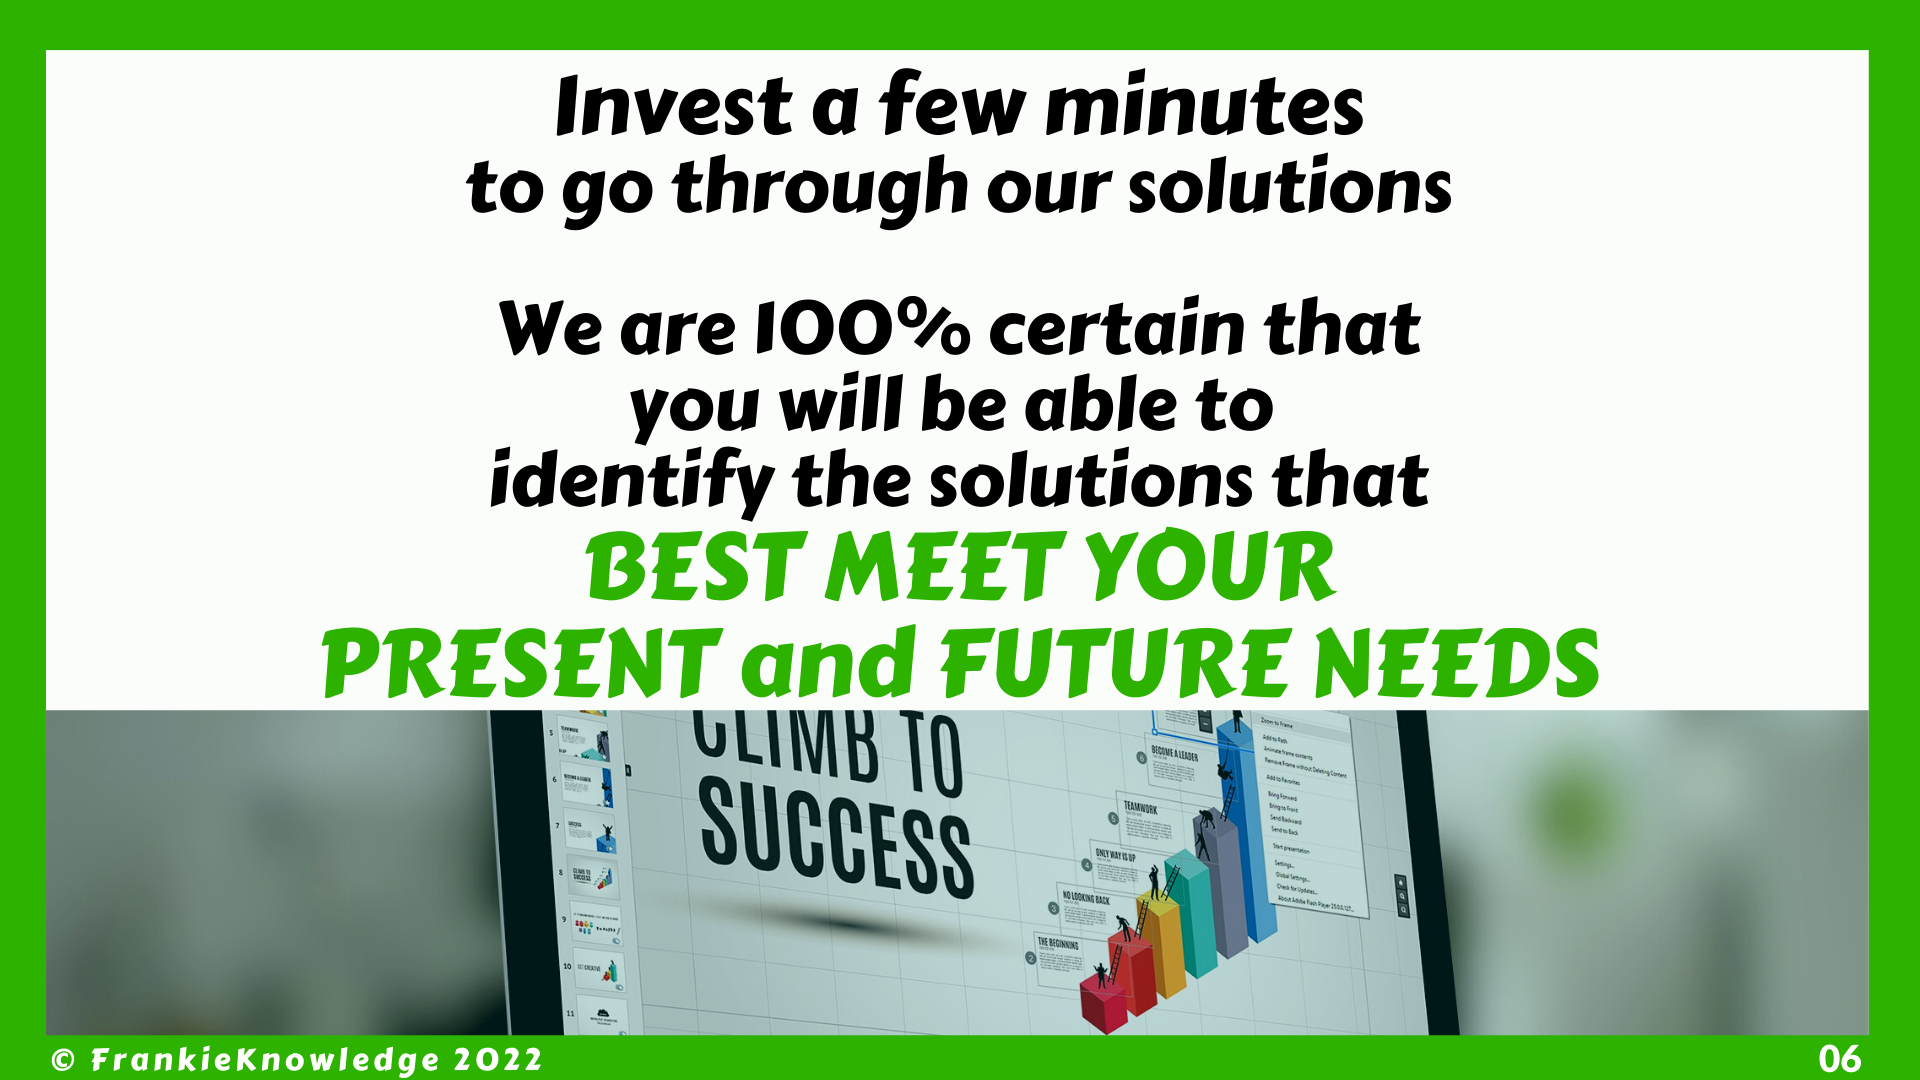 FrankieKnowledge is 100% certain that you will be able to identify the solutions that BEST MEET YOUR PRESENT and FUTURE NEEDS